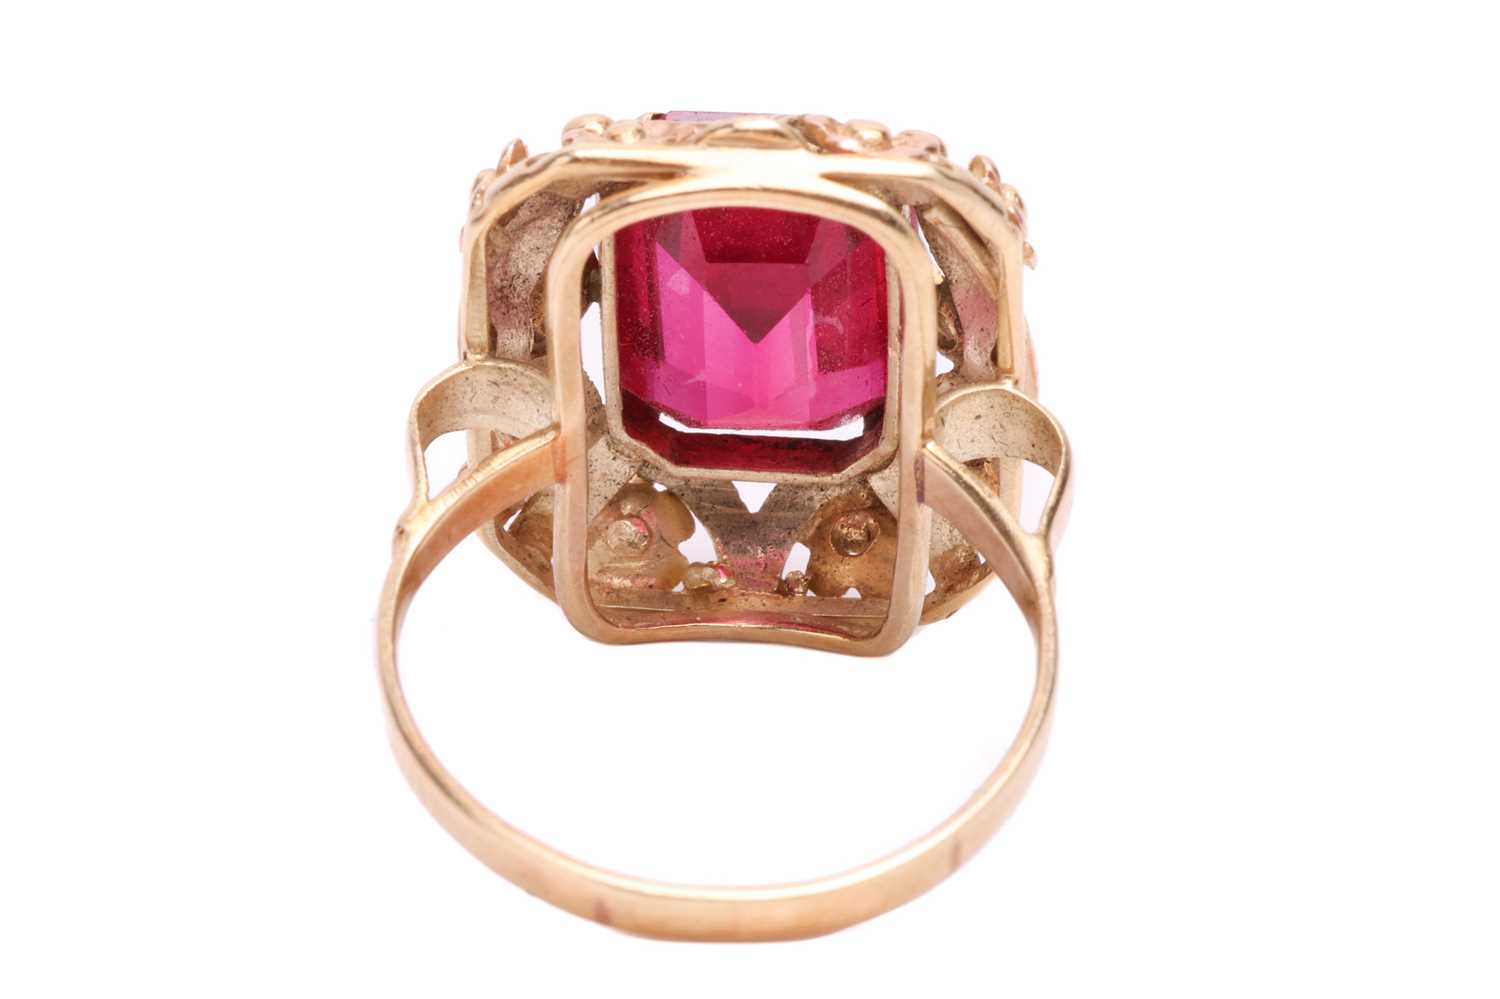 A synthetic ruby dress ring, centred with an octagonal-cut synthetic ruby within an intricately embo - Image 4 of 4